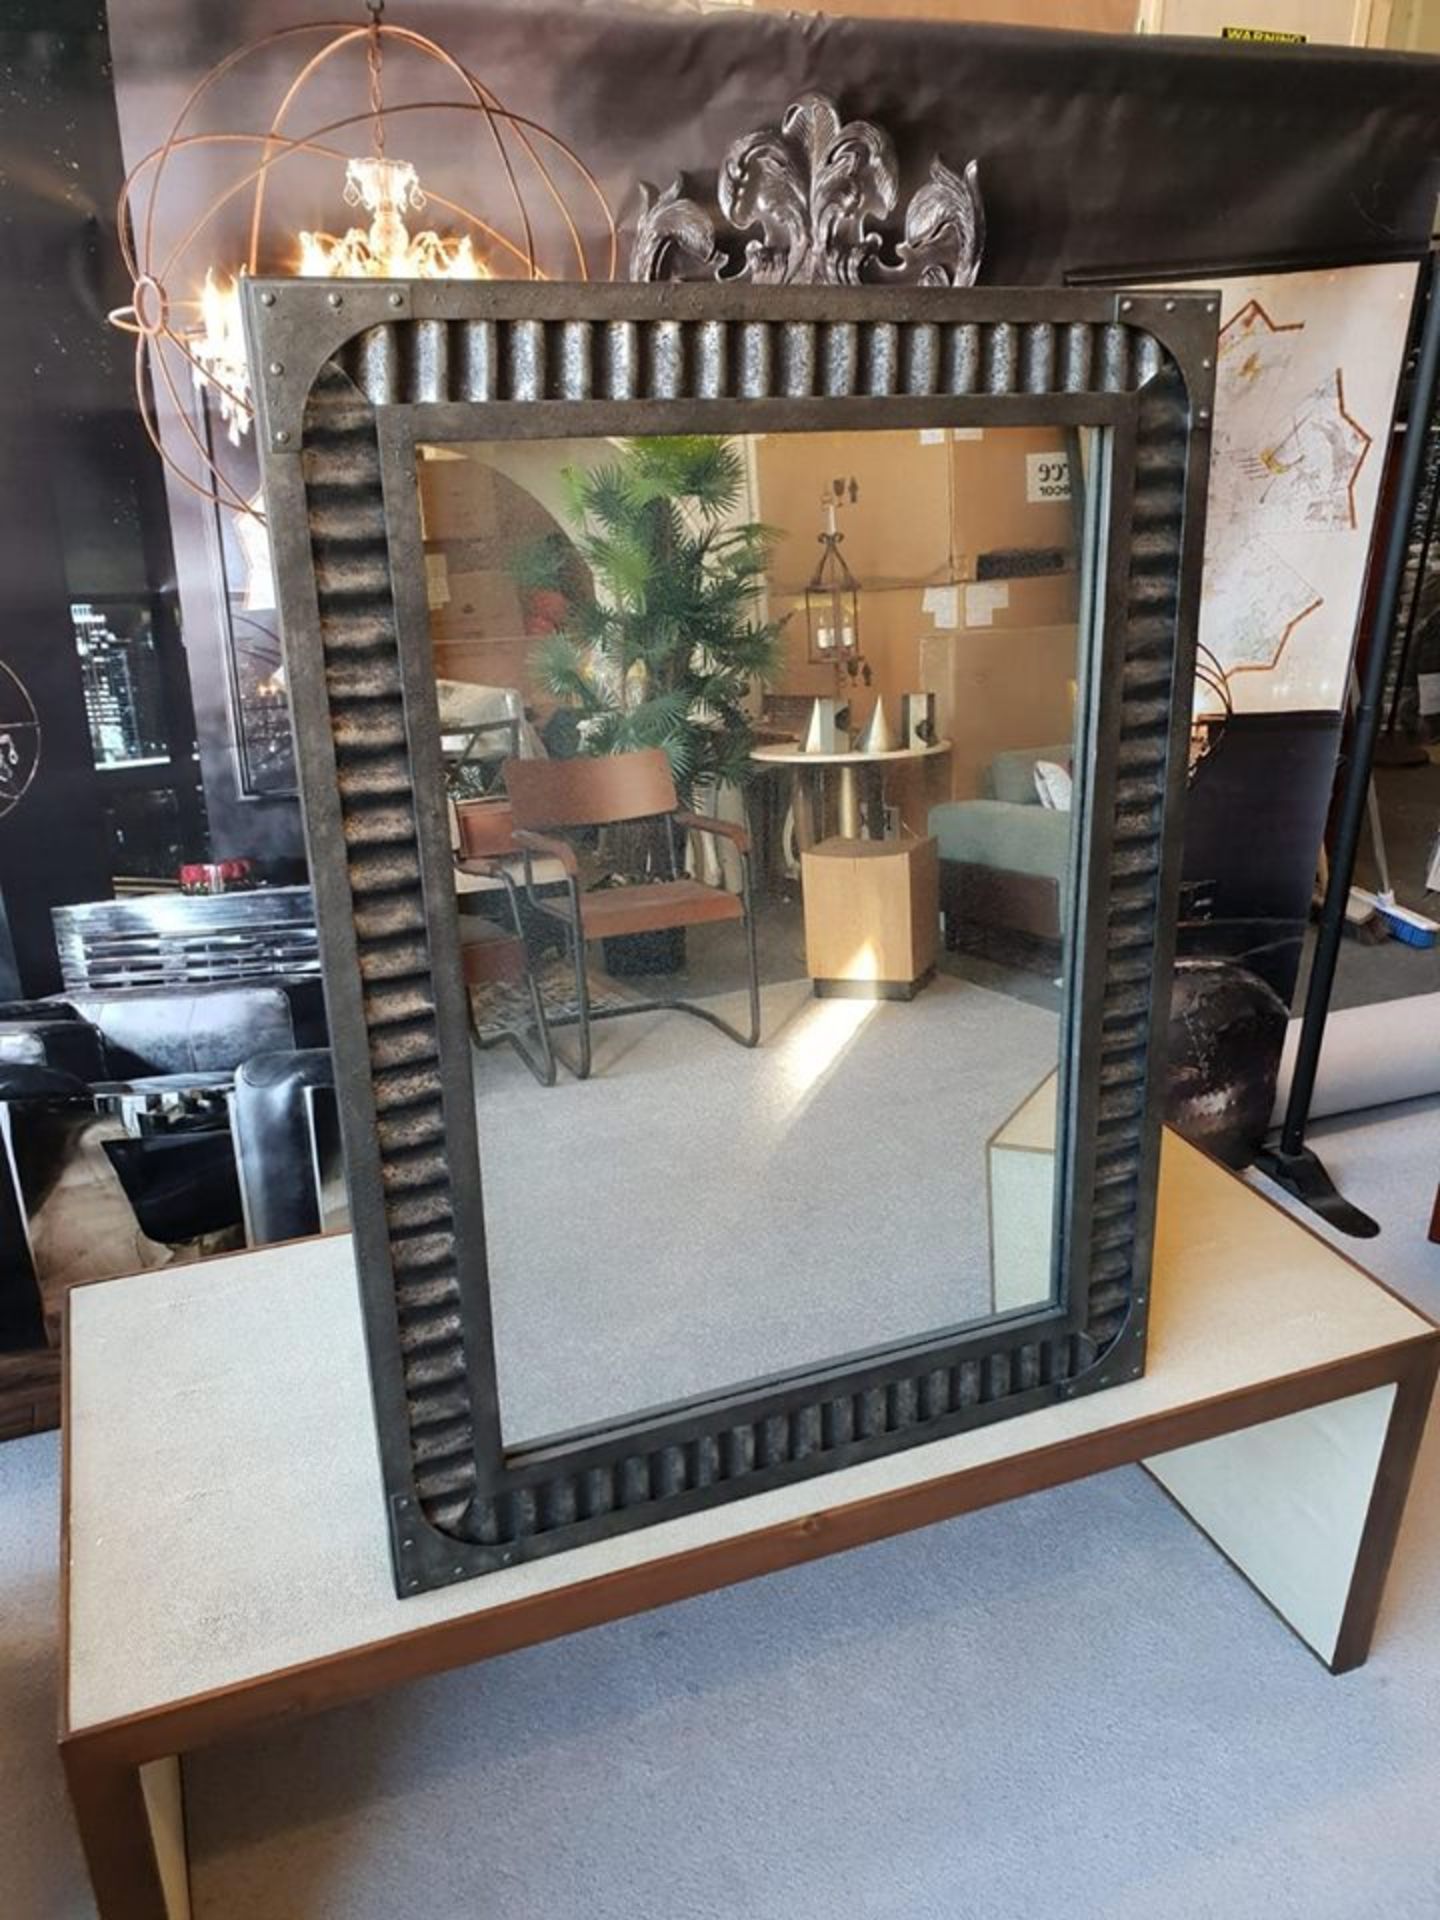 Jawa Floor Mirror Iron Frame With Corrugated Sheet Metal And Antiqued Mirror Plate 106.7 x 3.8 x - Image 2 of 2